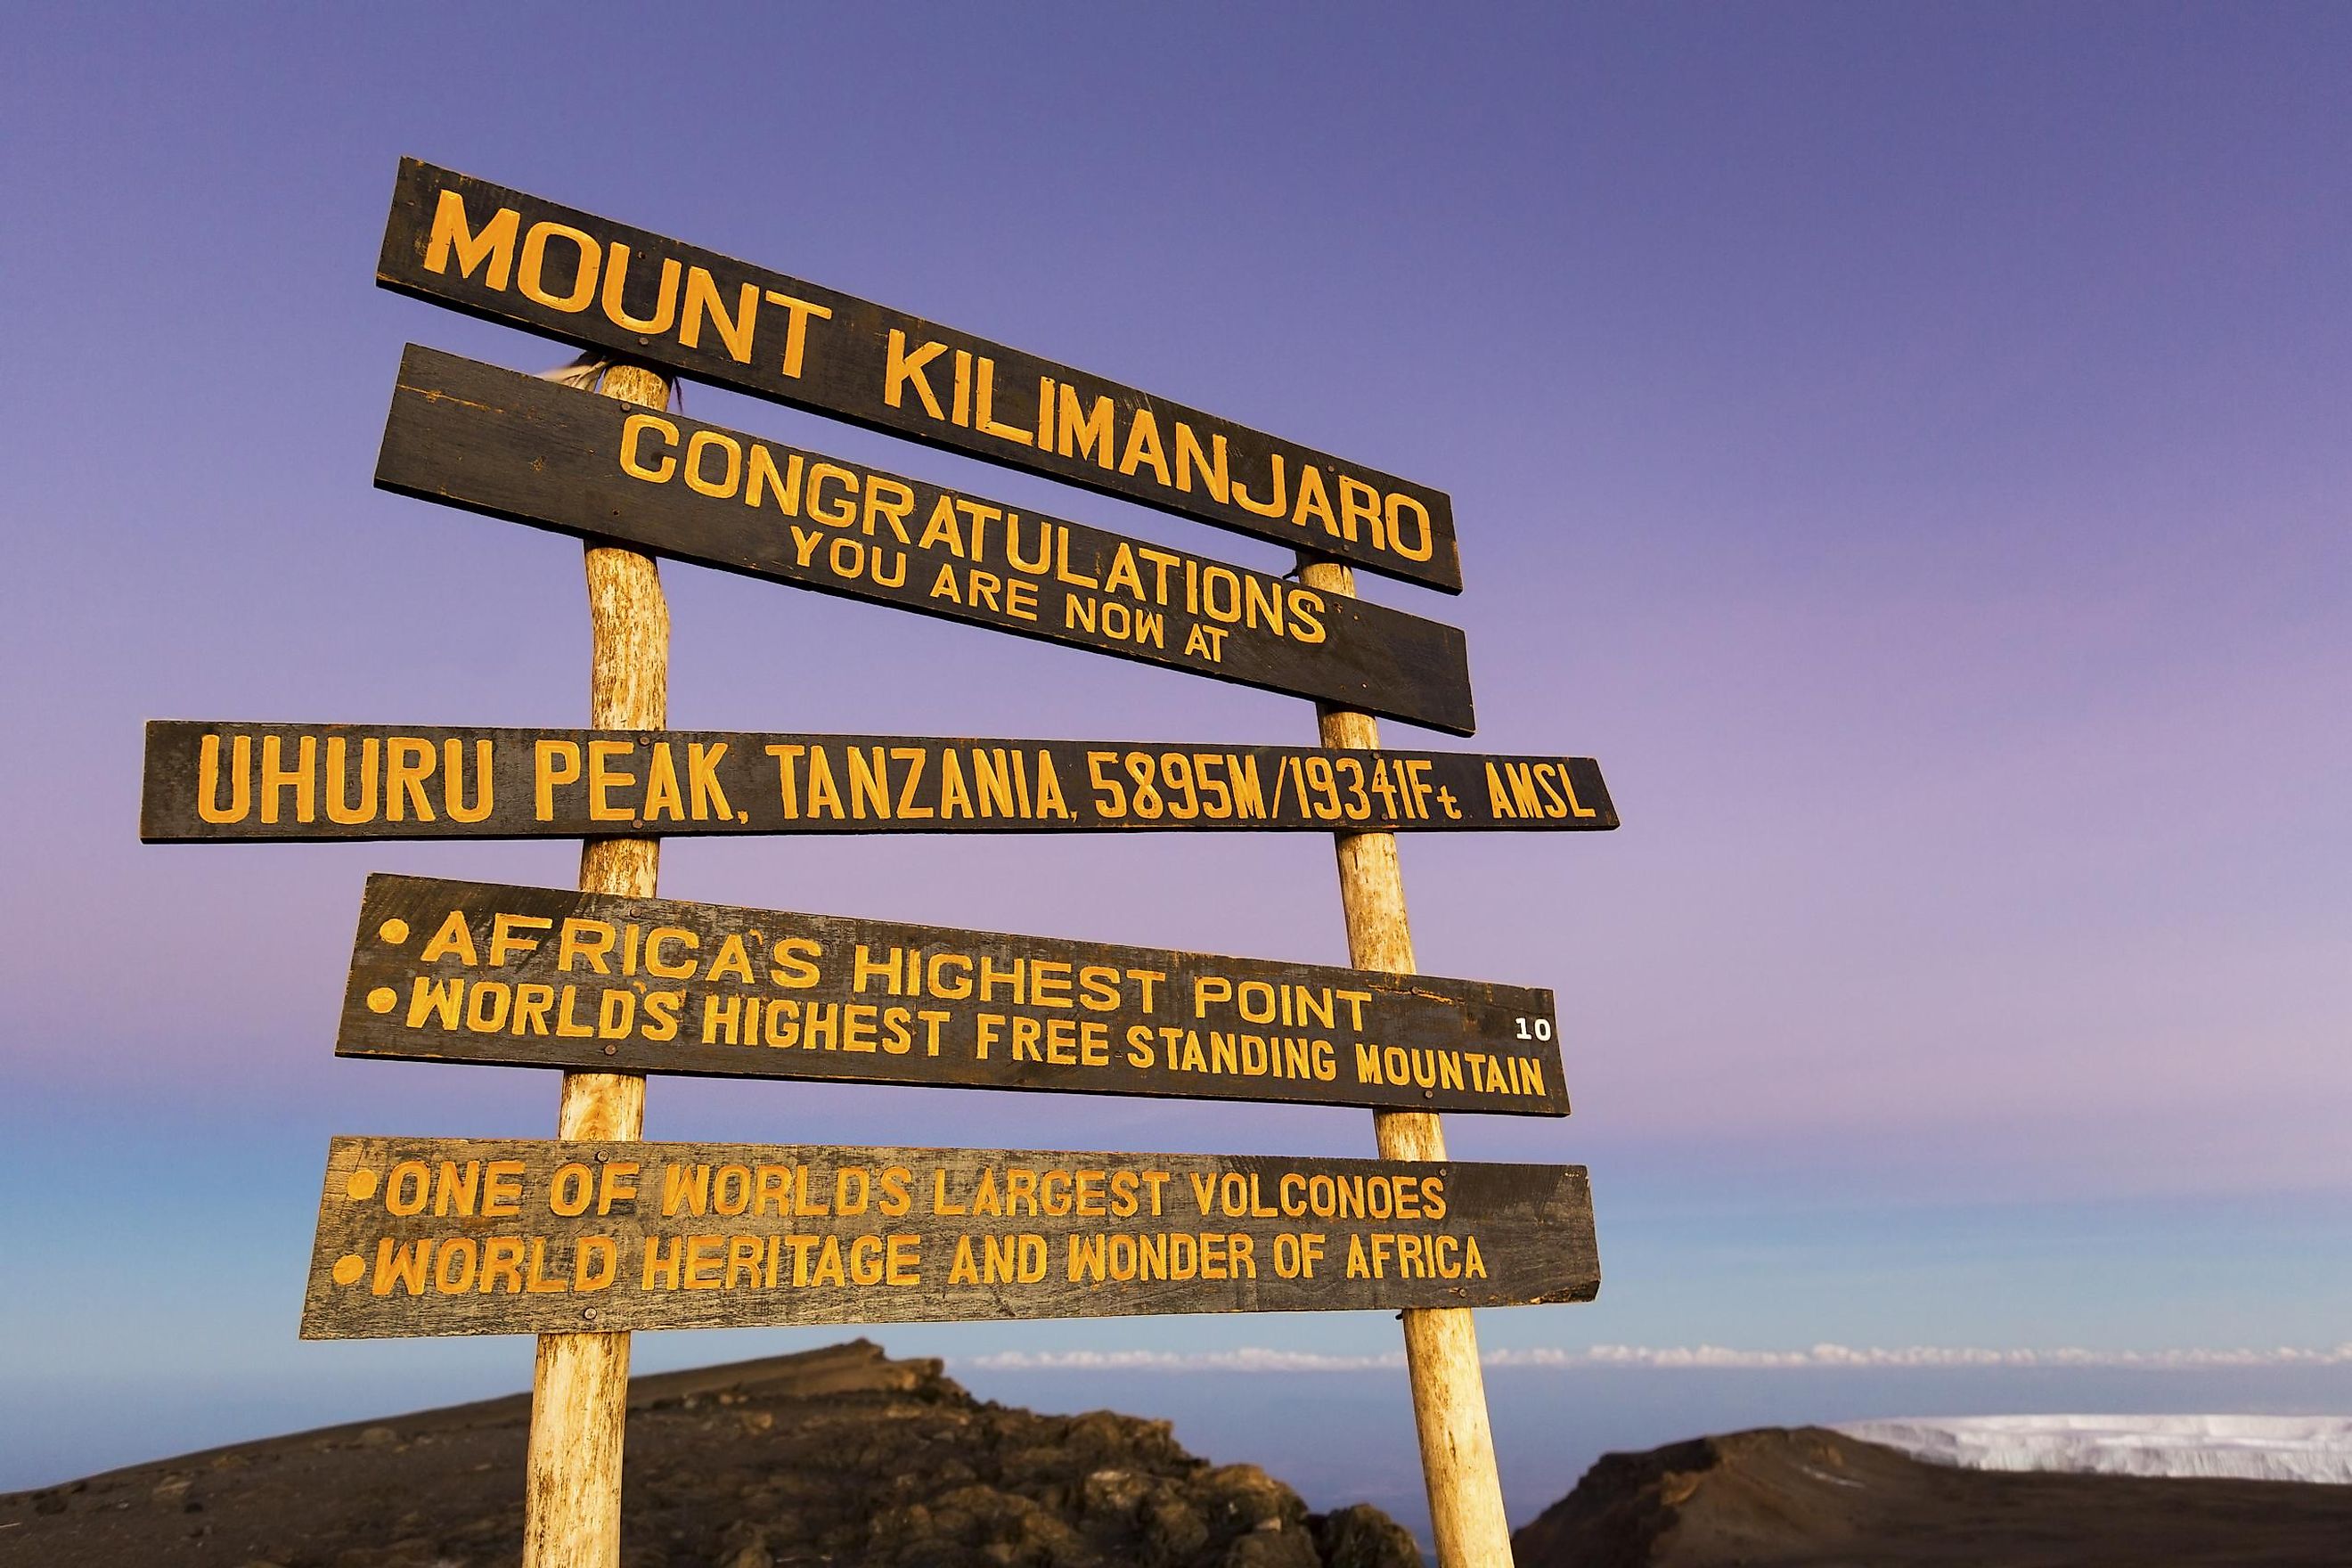 Mount Kilimanjaro is a tautological place.